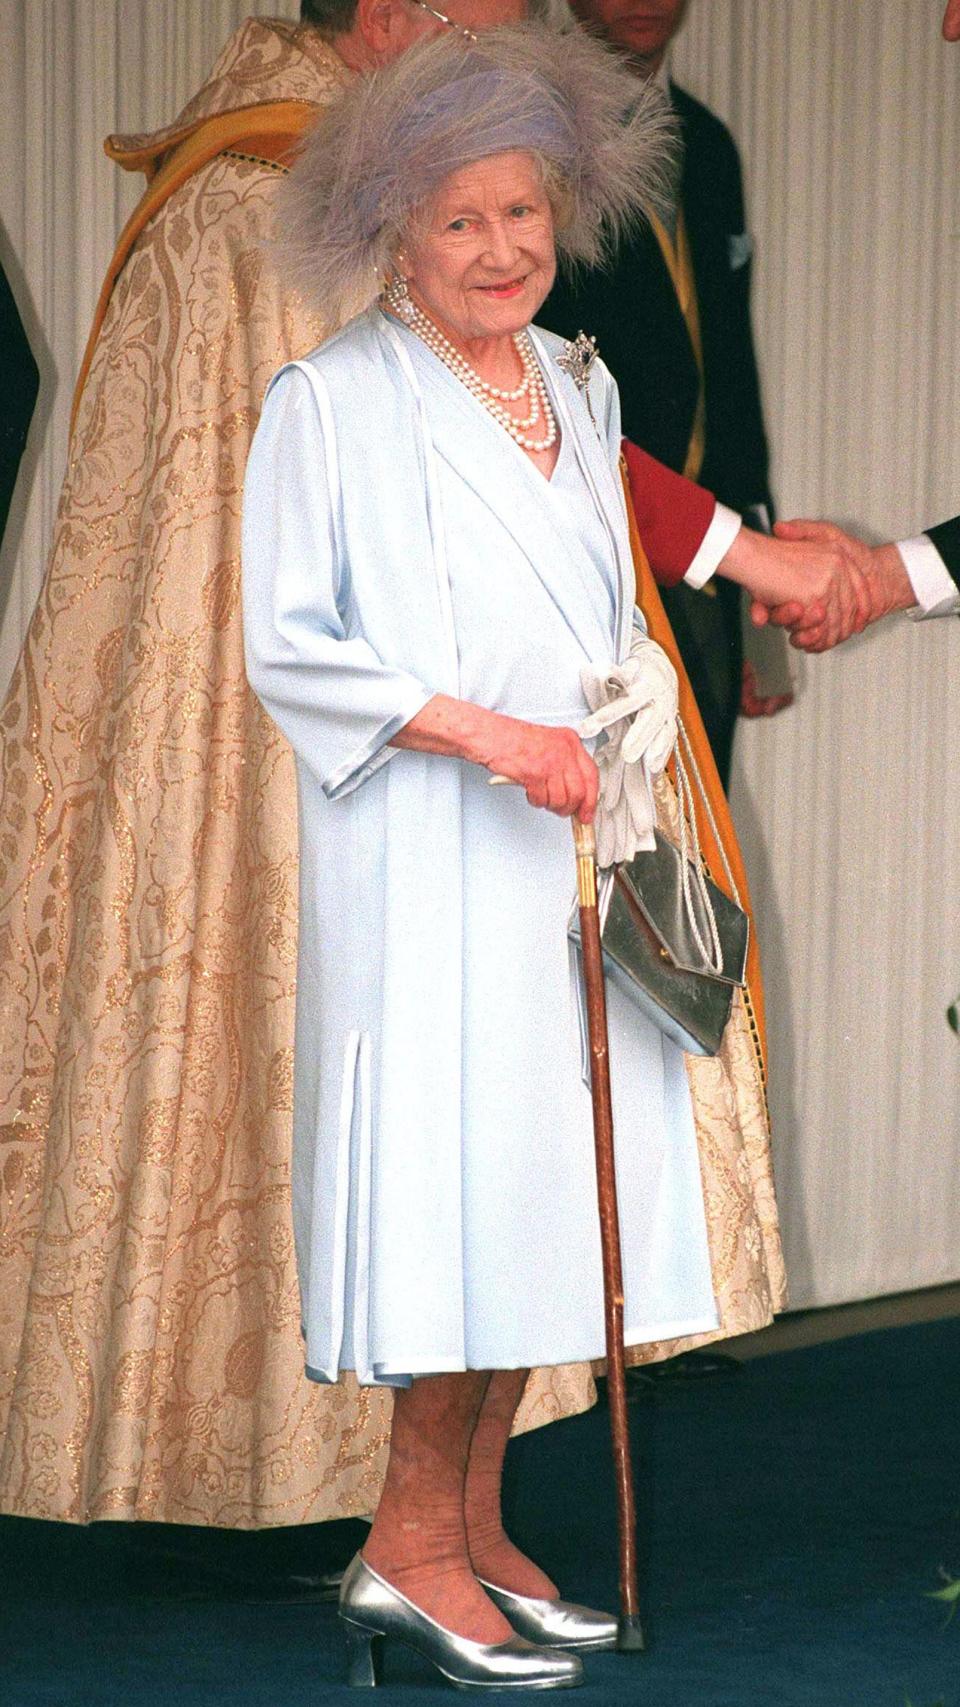 Queen Mother attends the wedding of Prince Edward and Sophie Rhys Jones June 19, 1999 in London